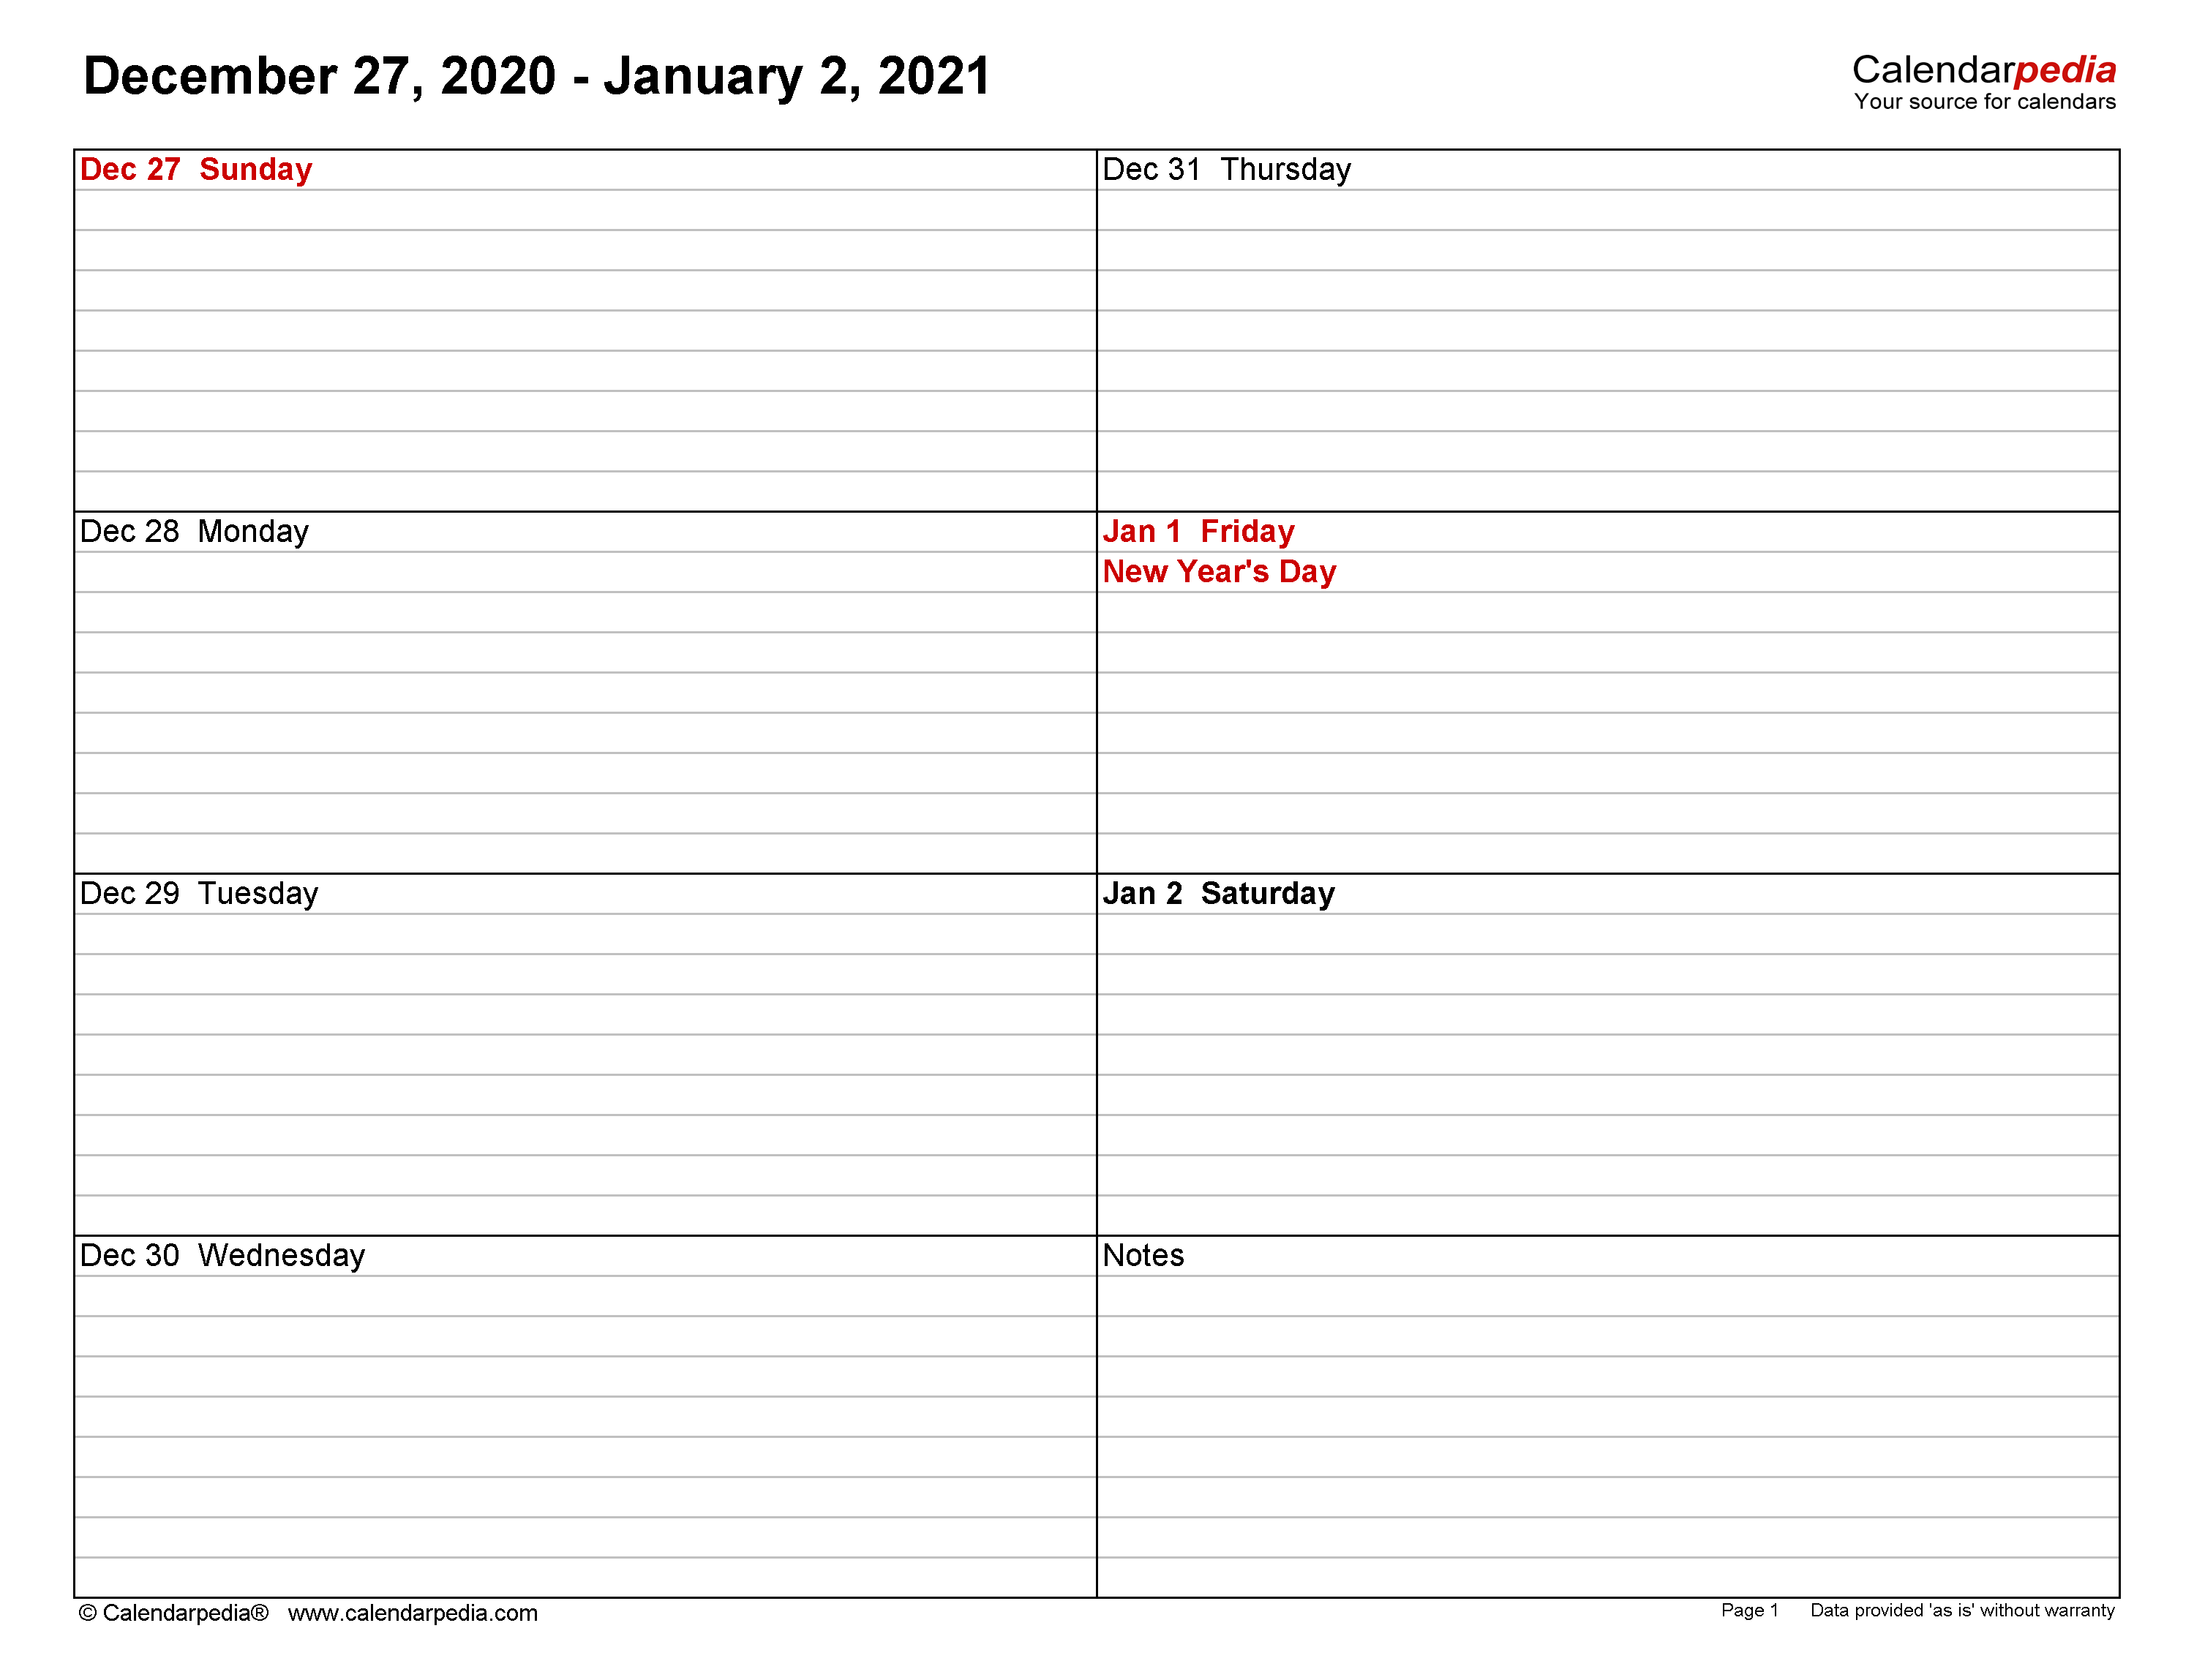 Weekly Calendars 2021 For PDF 12 Free Printable Templates